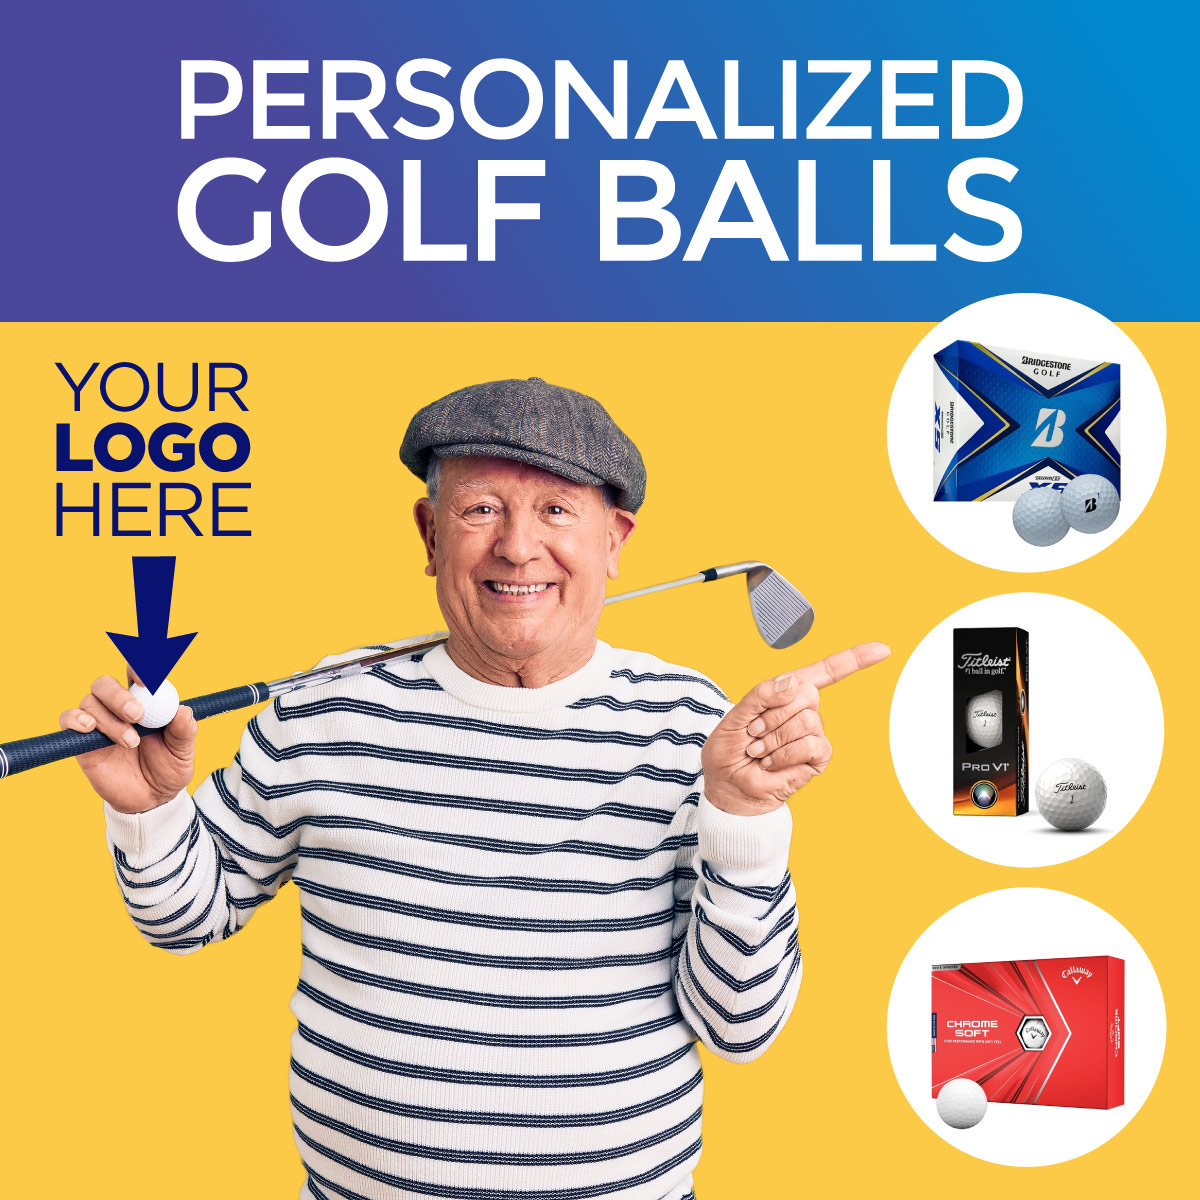 Old man with Irish had holding a golf ball and golf club. headline reads personalized golf balls.